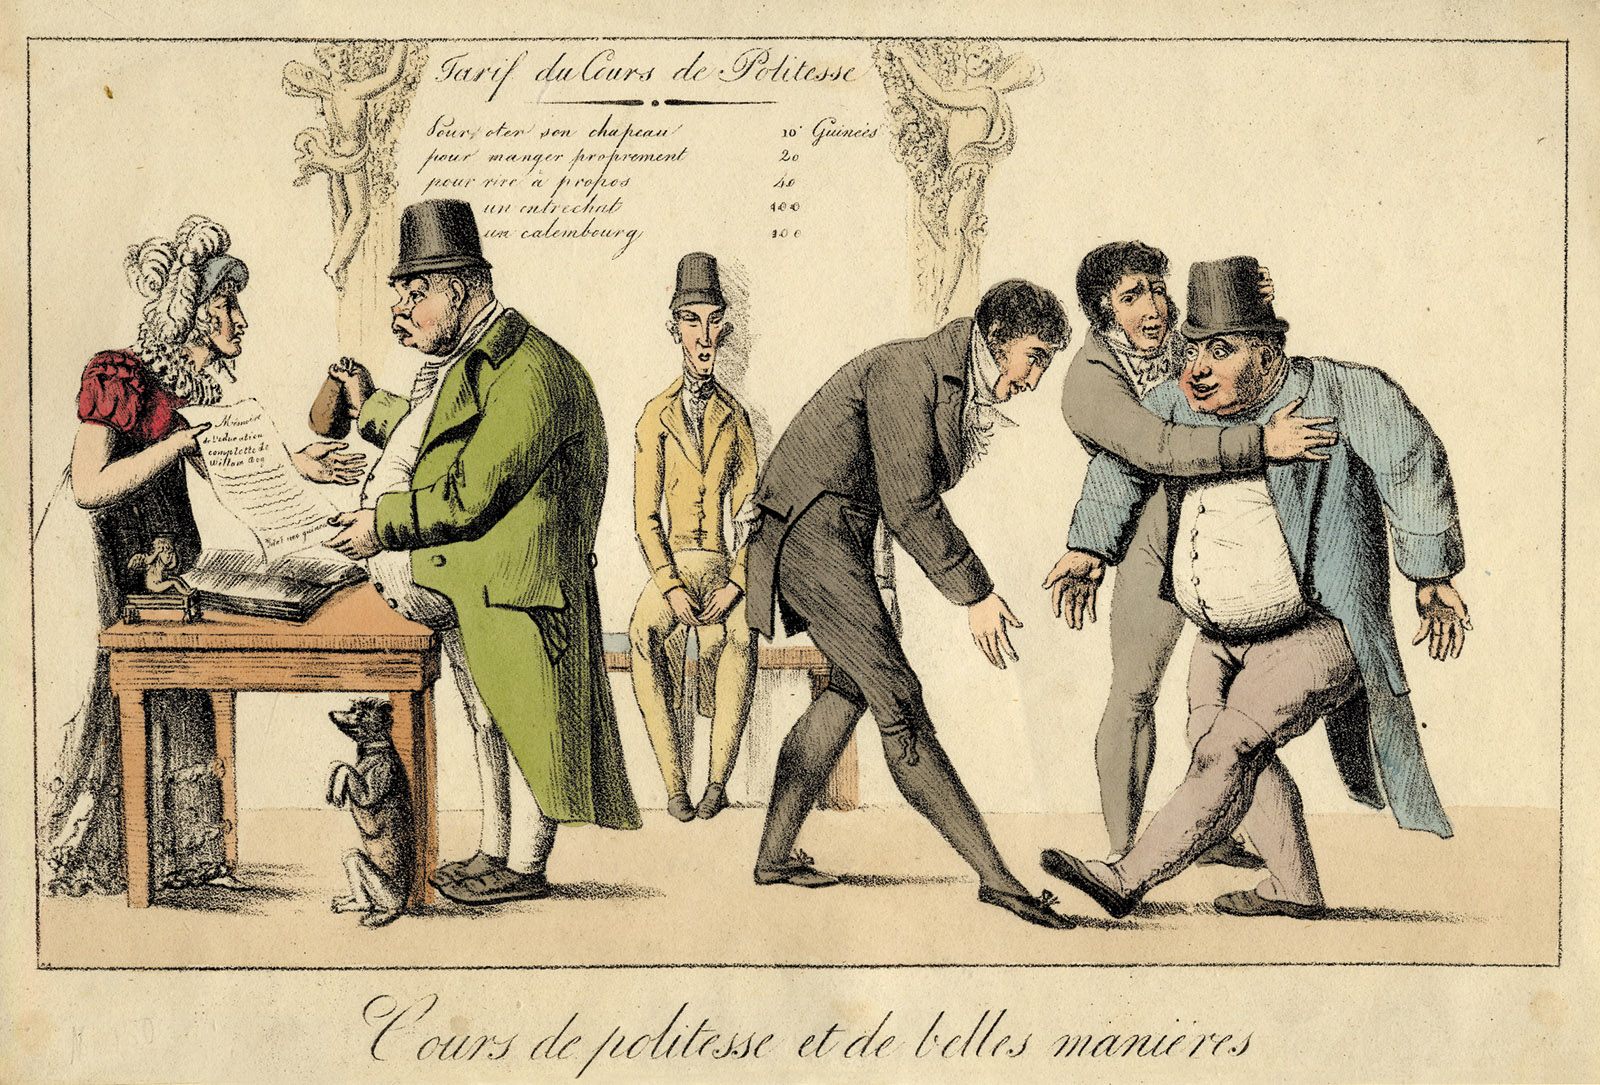 A satirical lithograph of Englishmen learning to bow in an etiquette course taught by the French, 1817